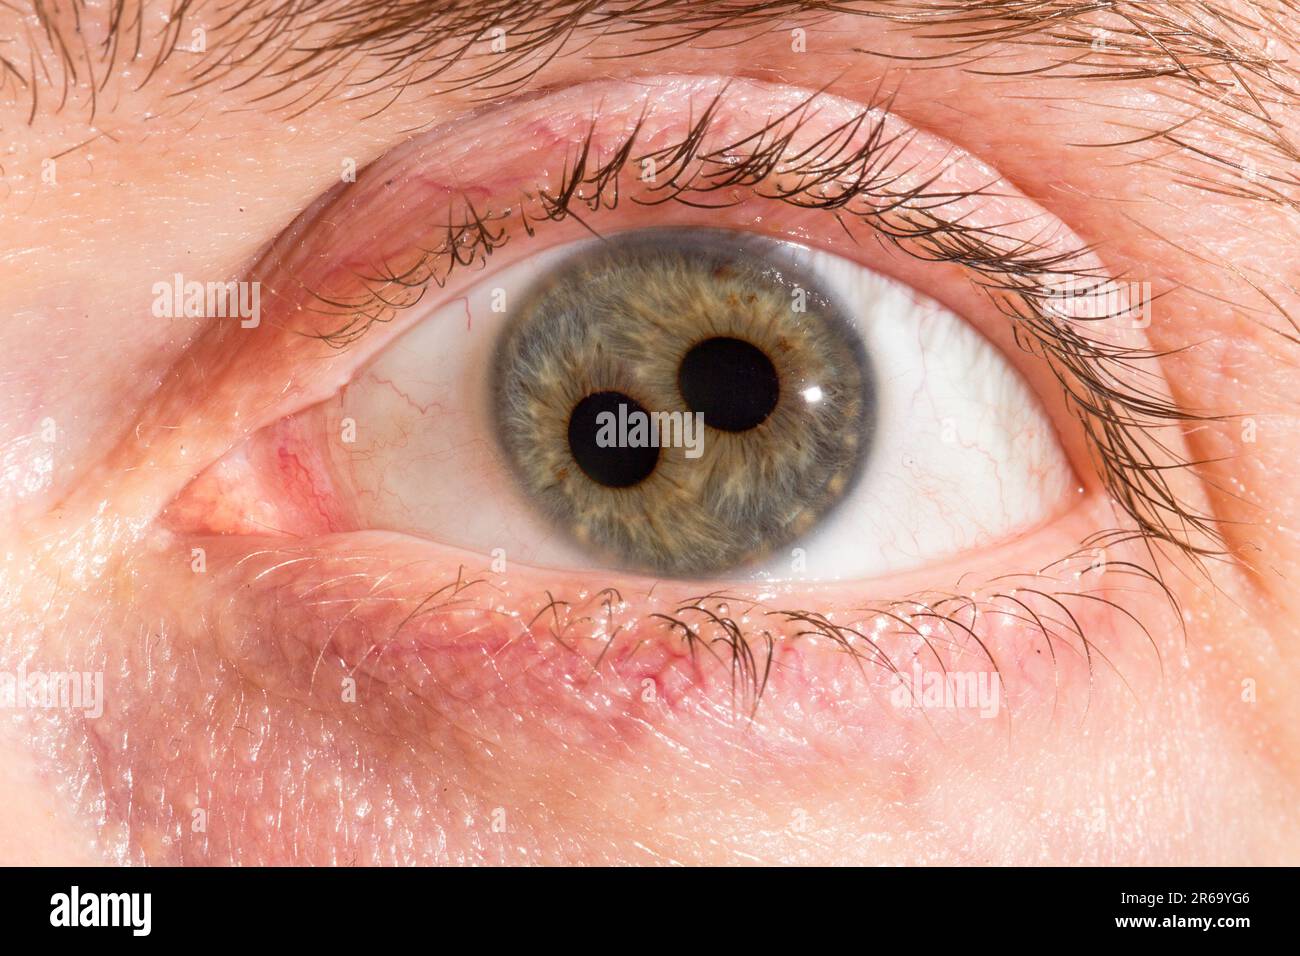 Macro of a man's human eye with double iris, close-up on the two pupils. Congenital eye disease called polycoria characterized by more than one pupill Stock Photo